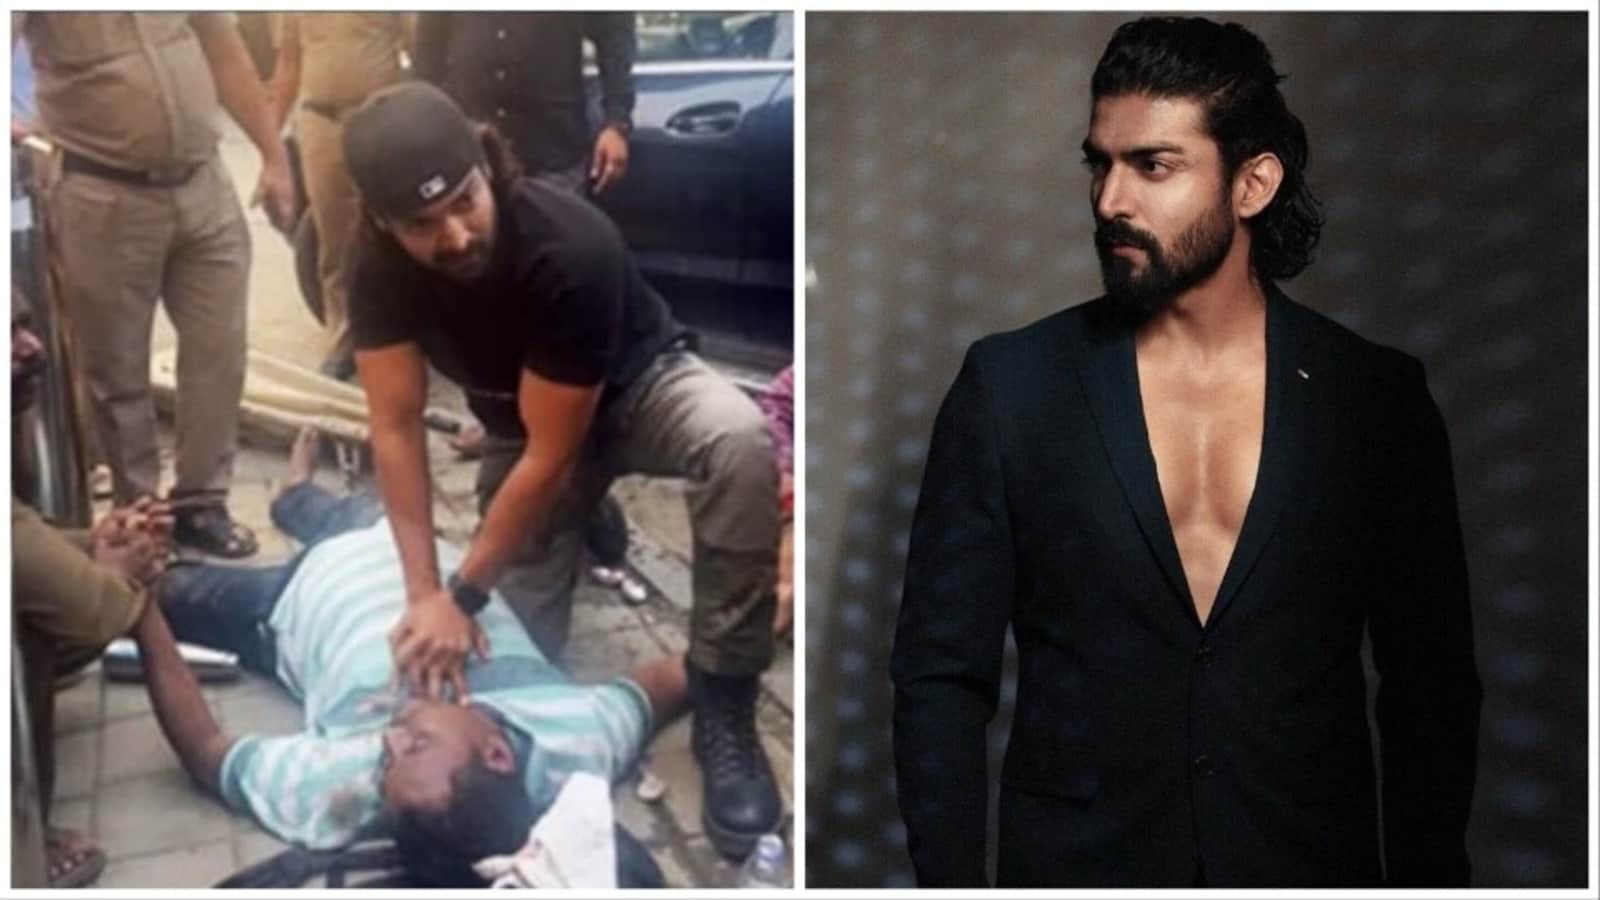 Gurmeet Choudhary Gives CPR To Man Who Collapsed On Street In Mumbai